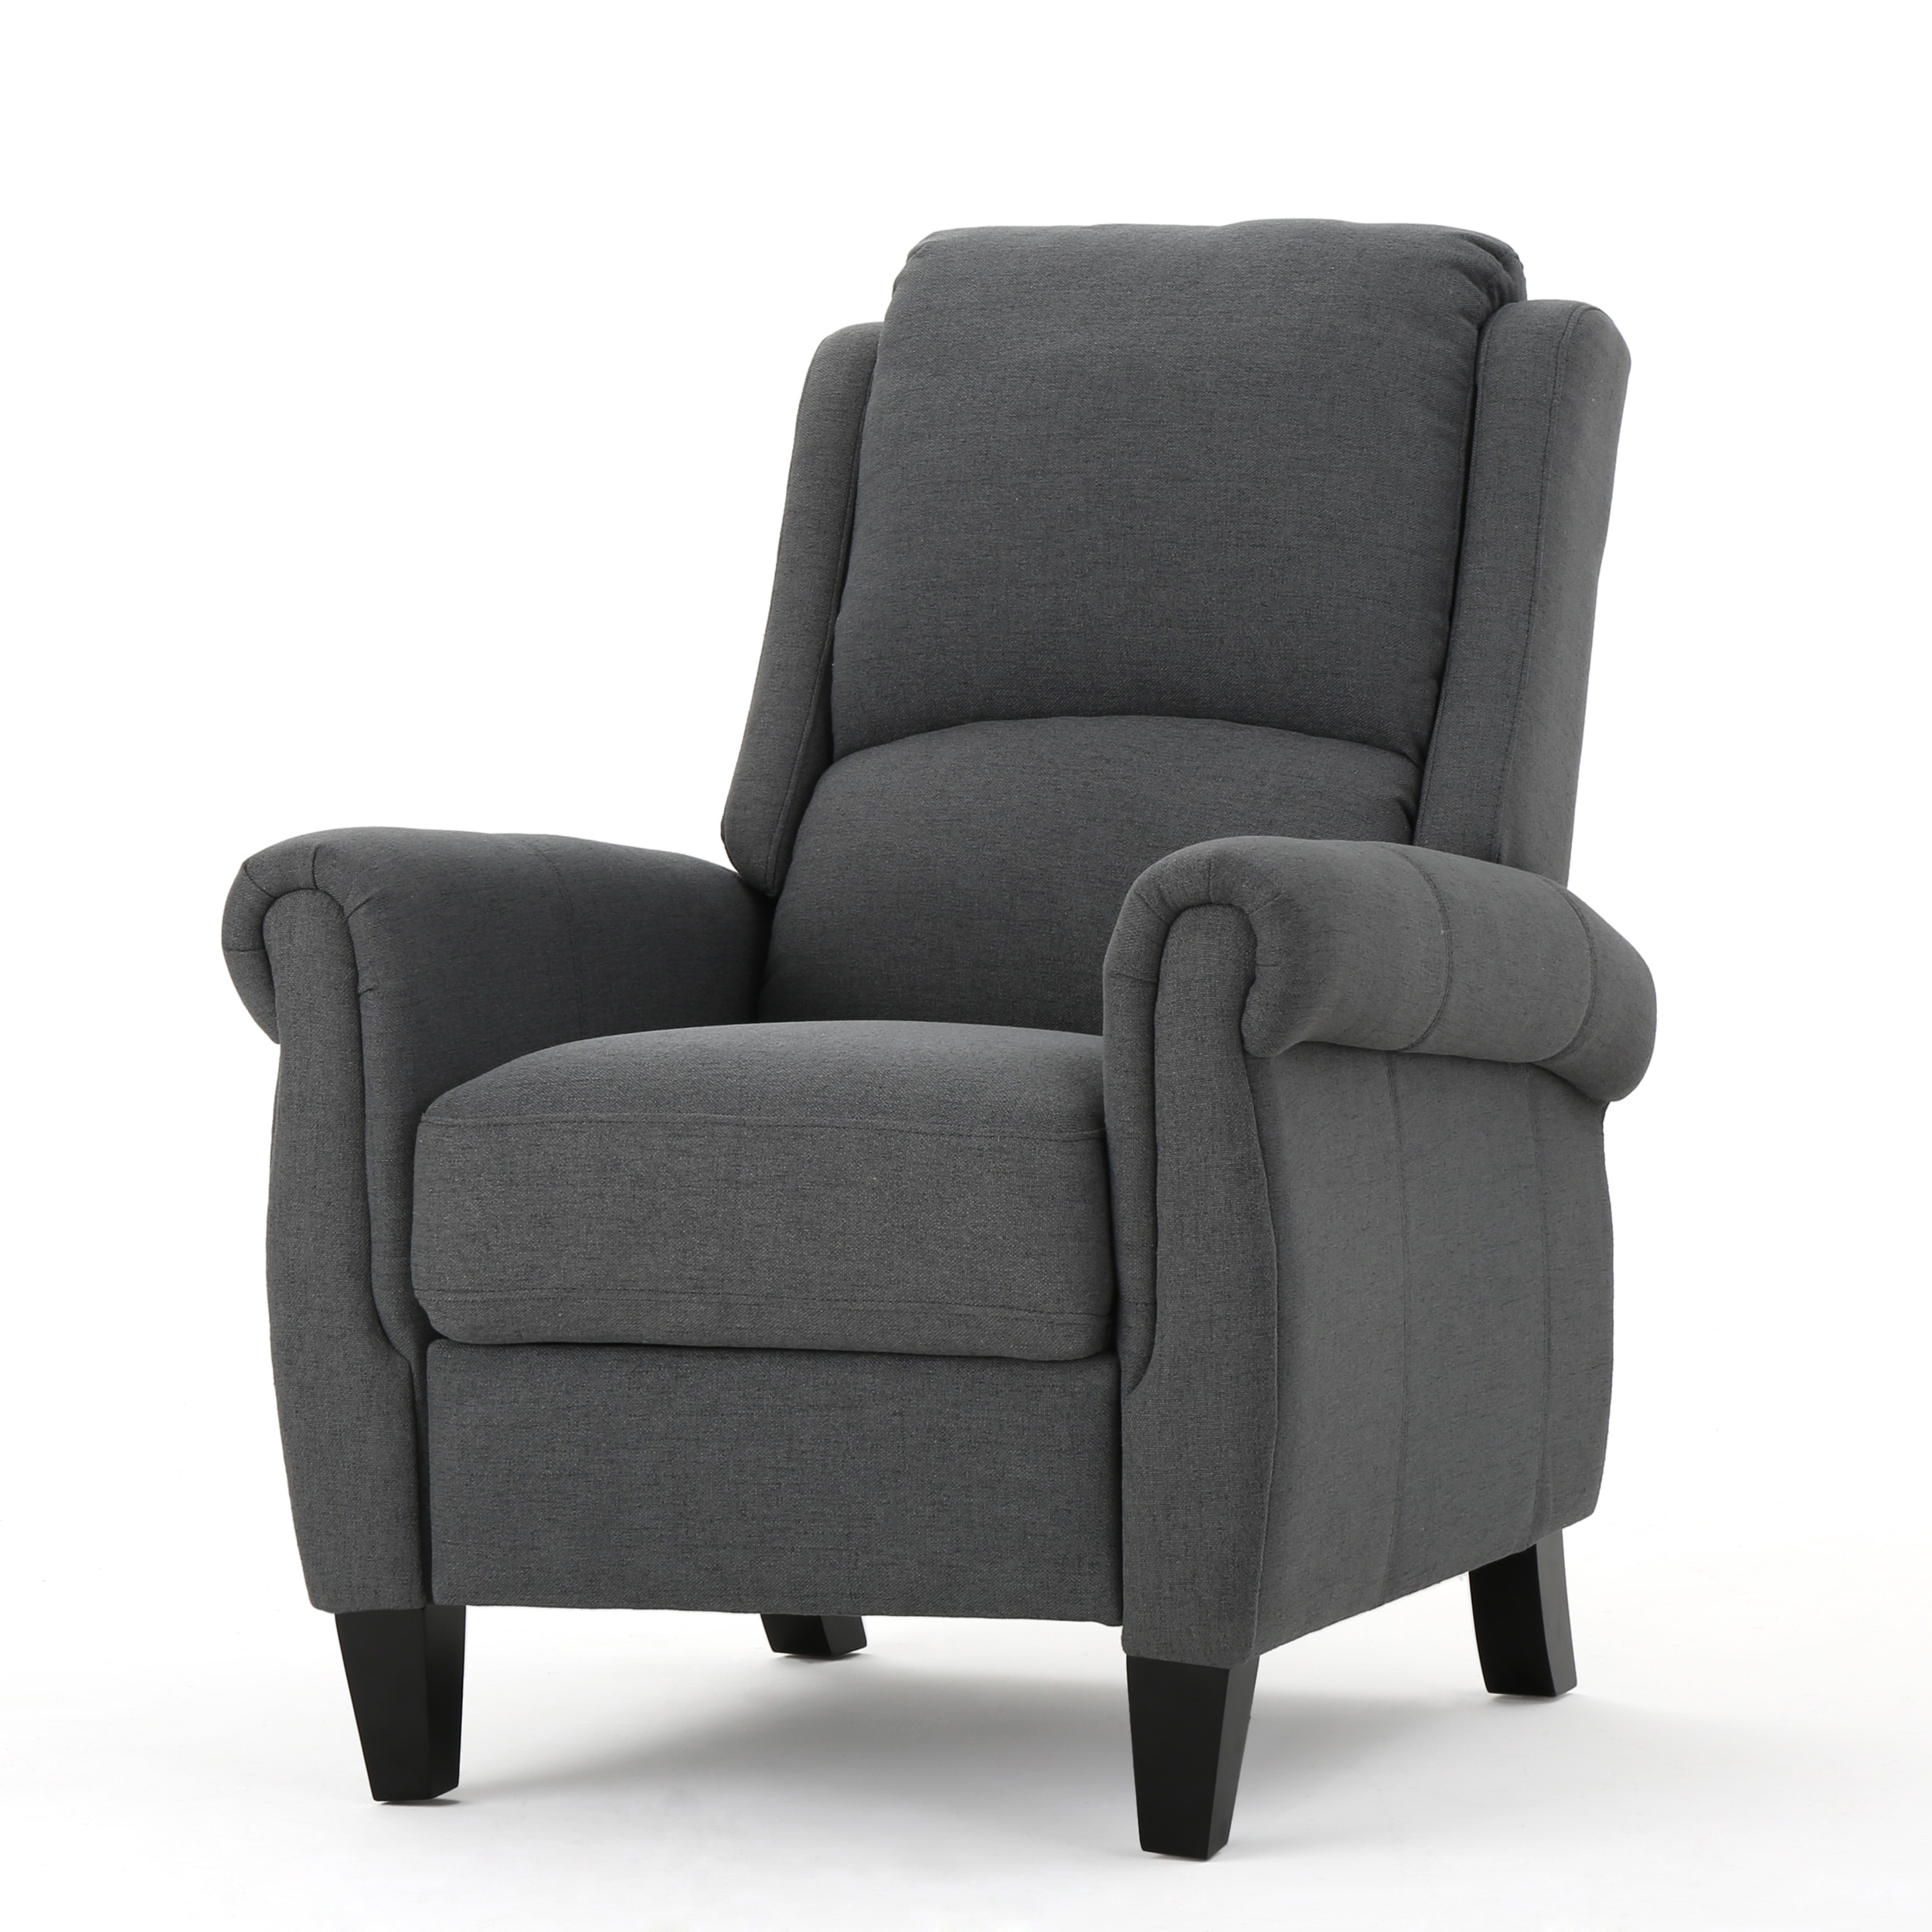 Haddan Fabric Recliner Club Chair By Christopher Knight Home